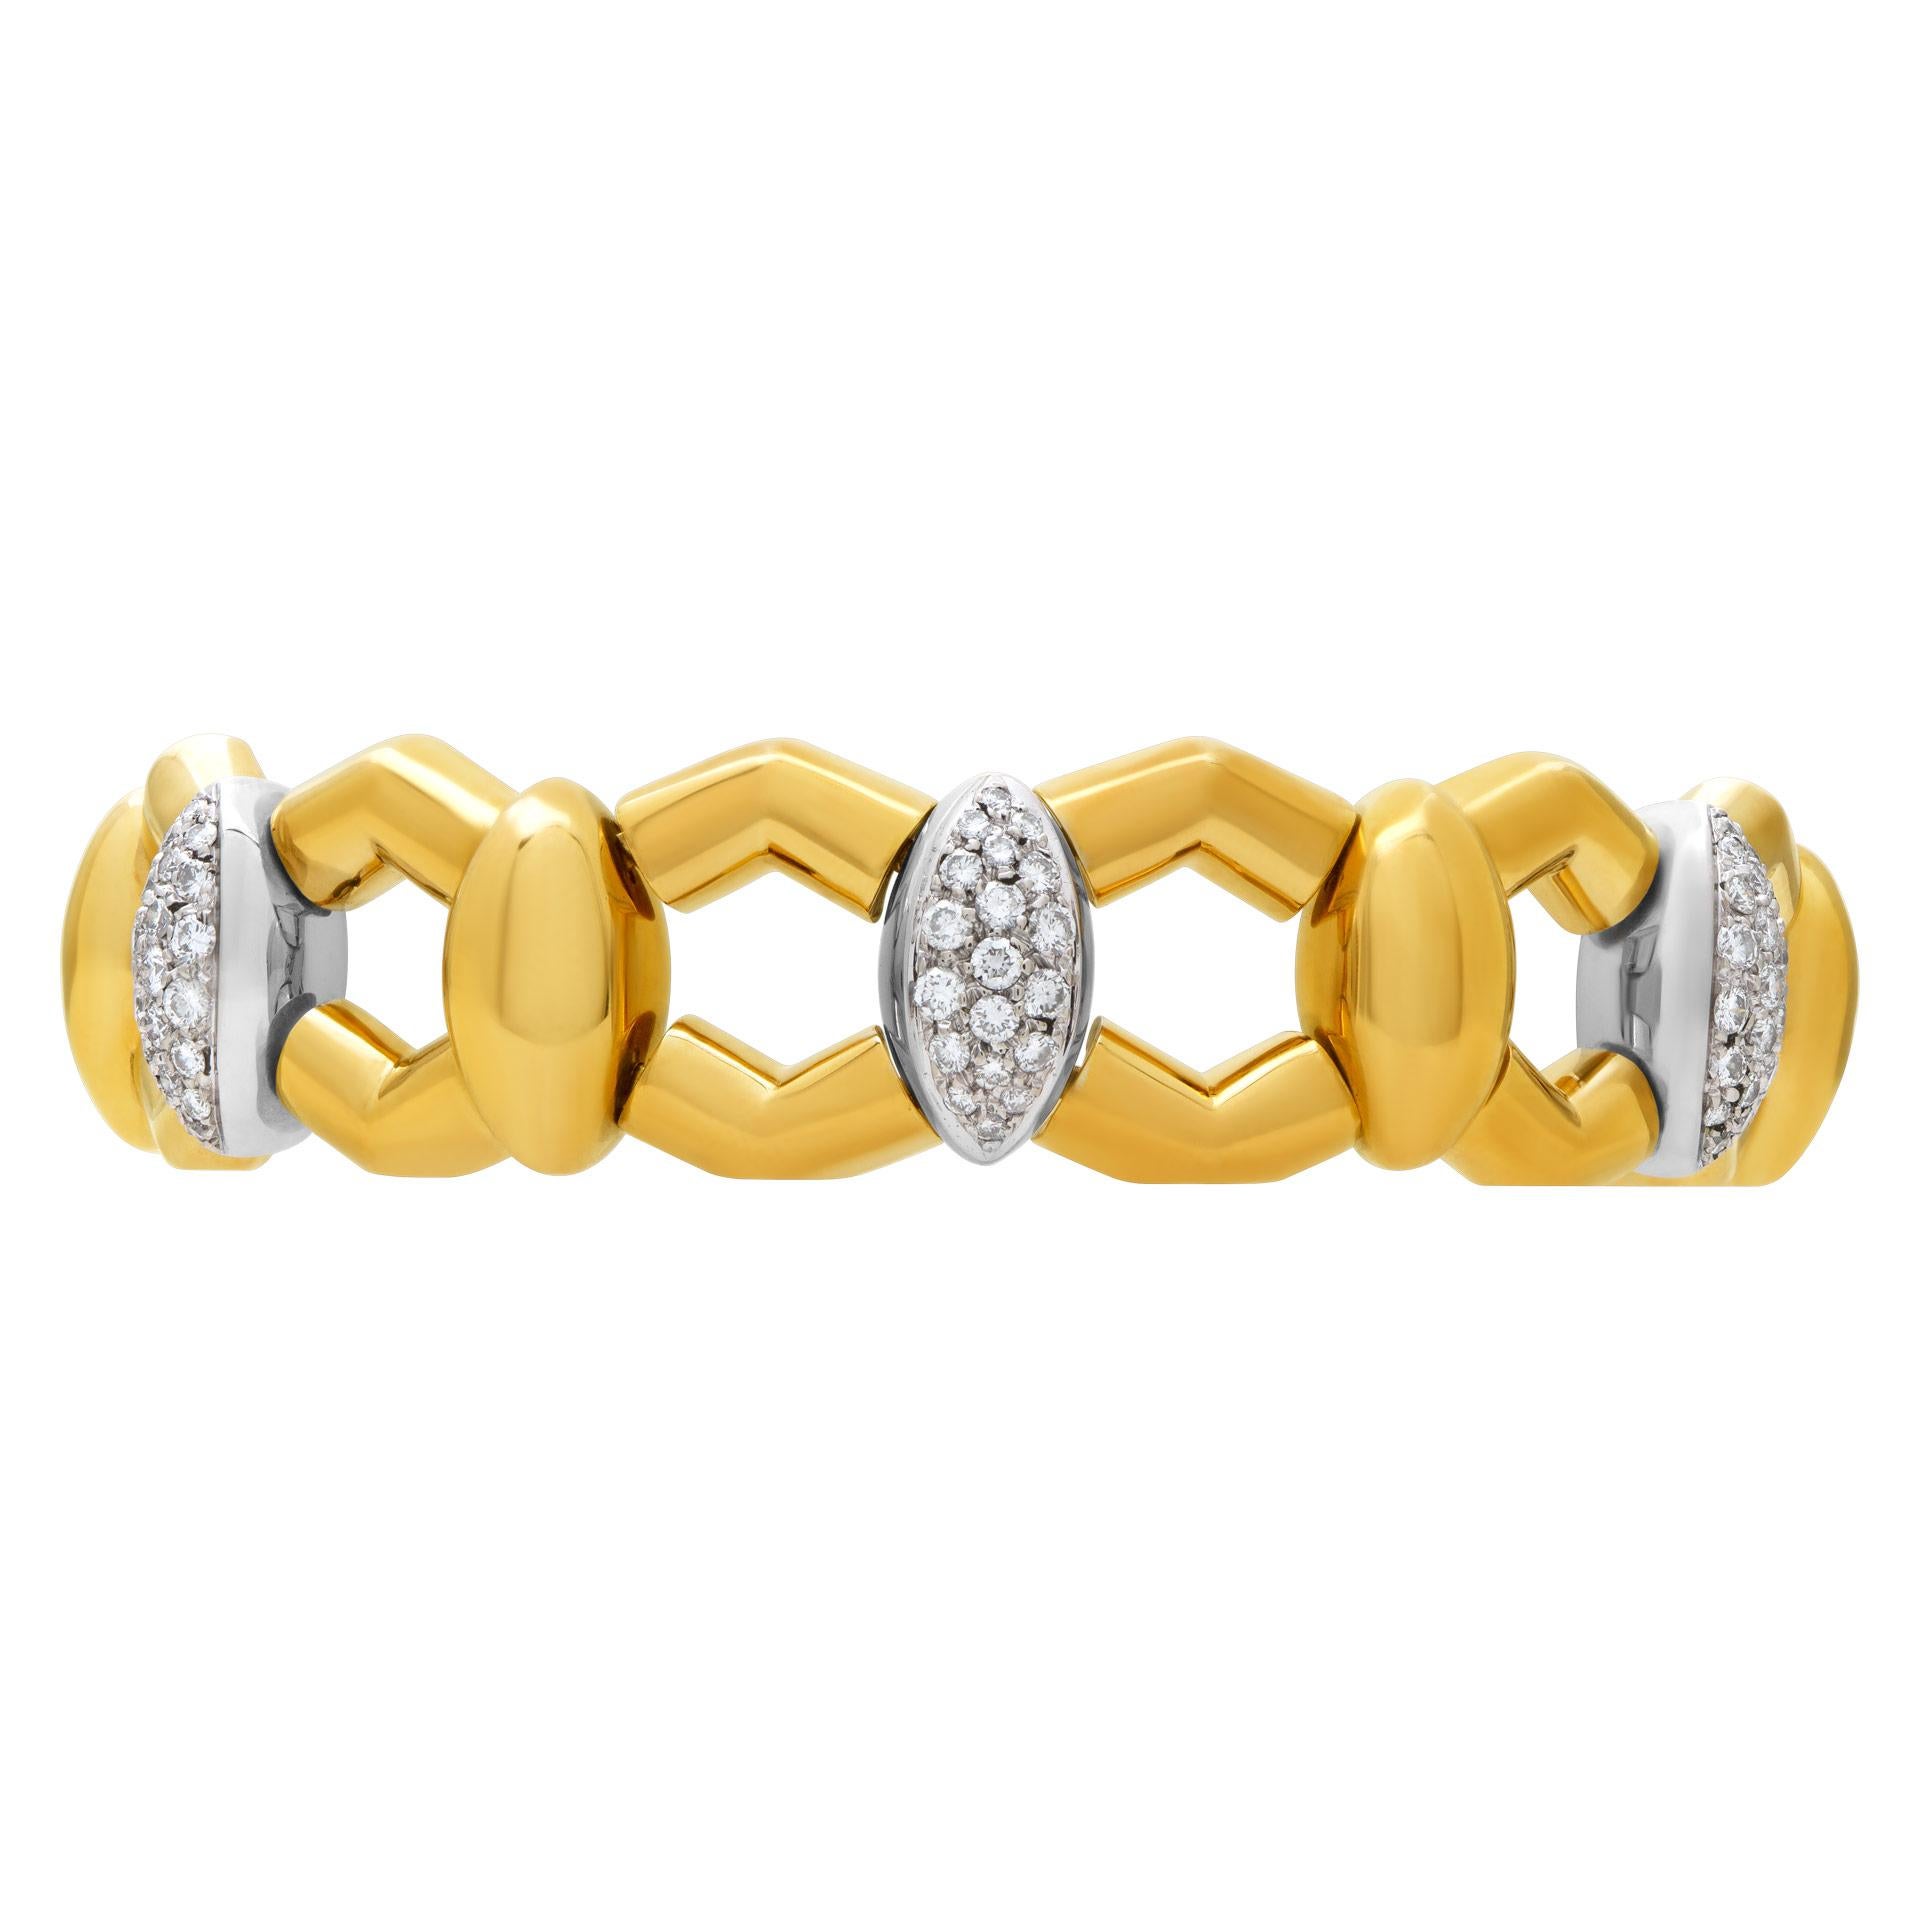 Diamond bracelet set in 18k yellow gold with full cut round brilliant diamonds total approx. weight: 2.35 carats G-H color, VS-SI clarity diamonds. 7